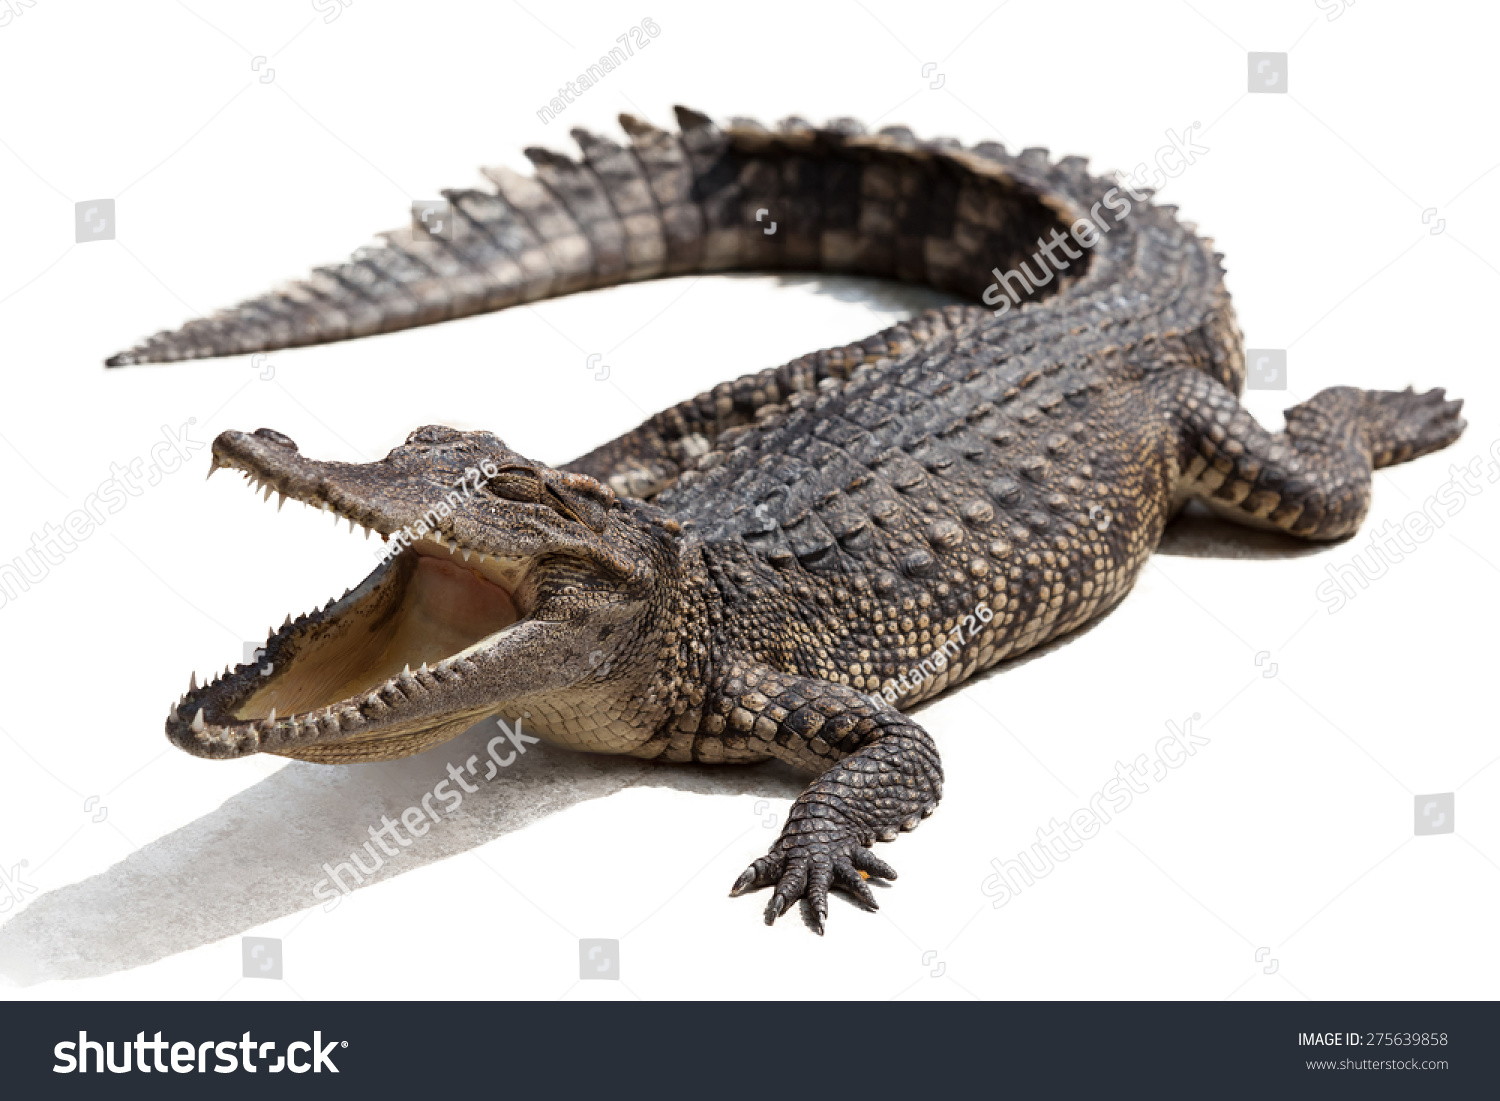 https://image.shutterstock.com/z/stock-photo-crocodile-with-open-mouth-on-white-background-275639858.jpg